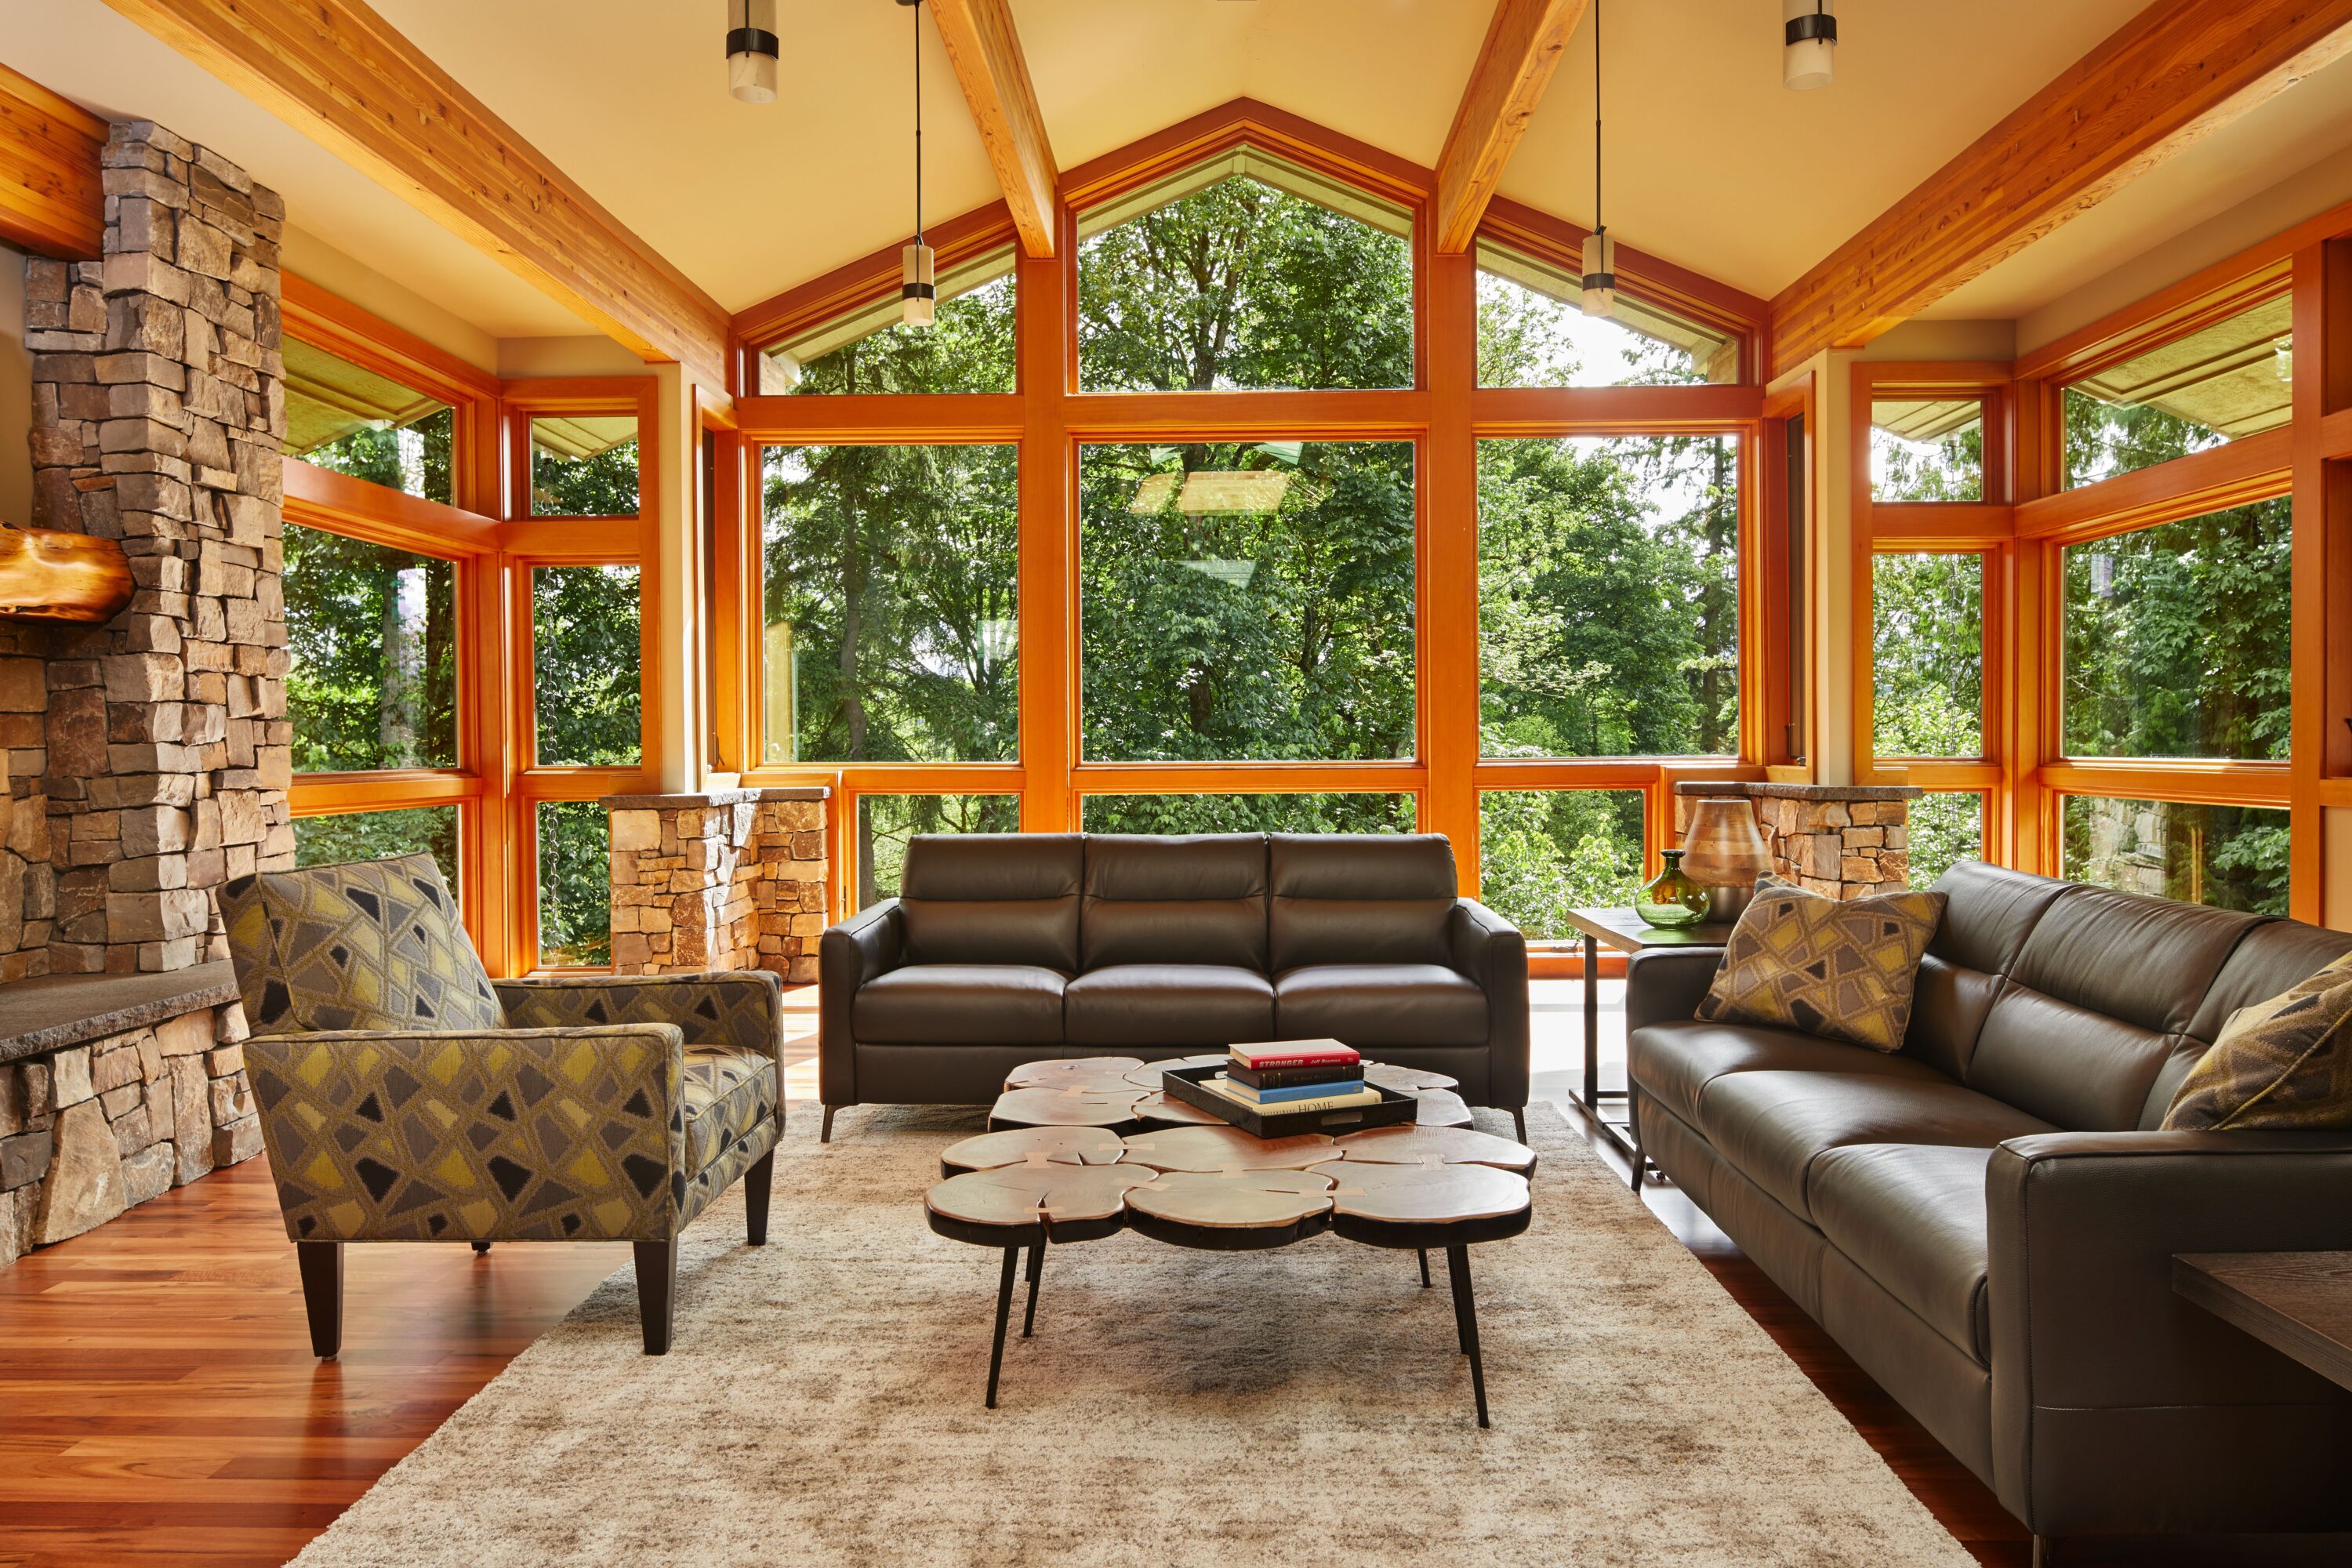 This Redmond home merges wood, glass, and stone for truly exquisite home architecture. 